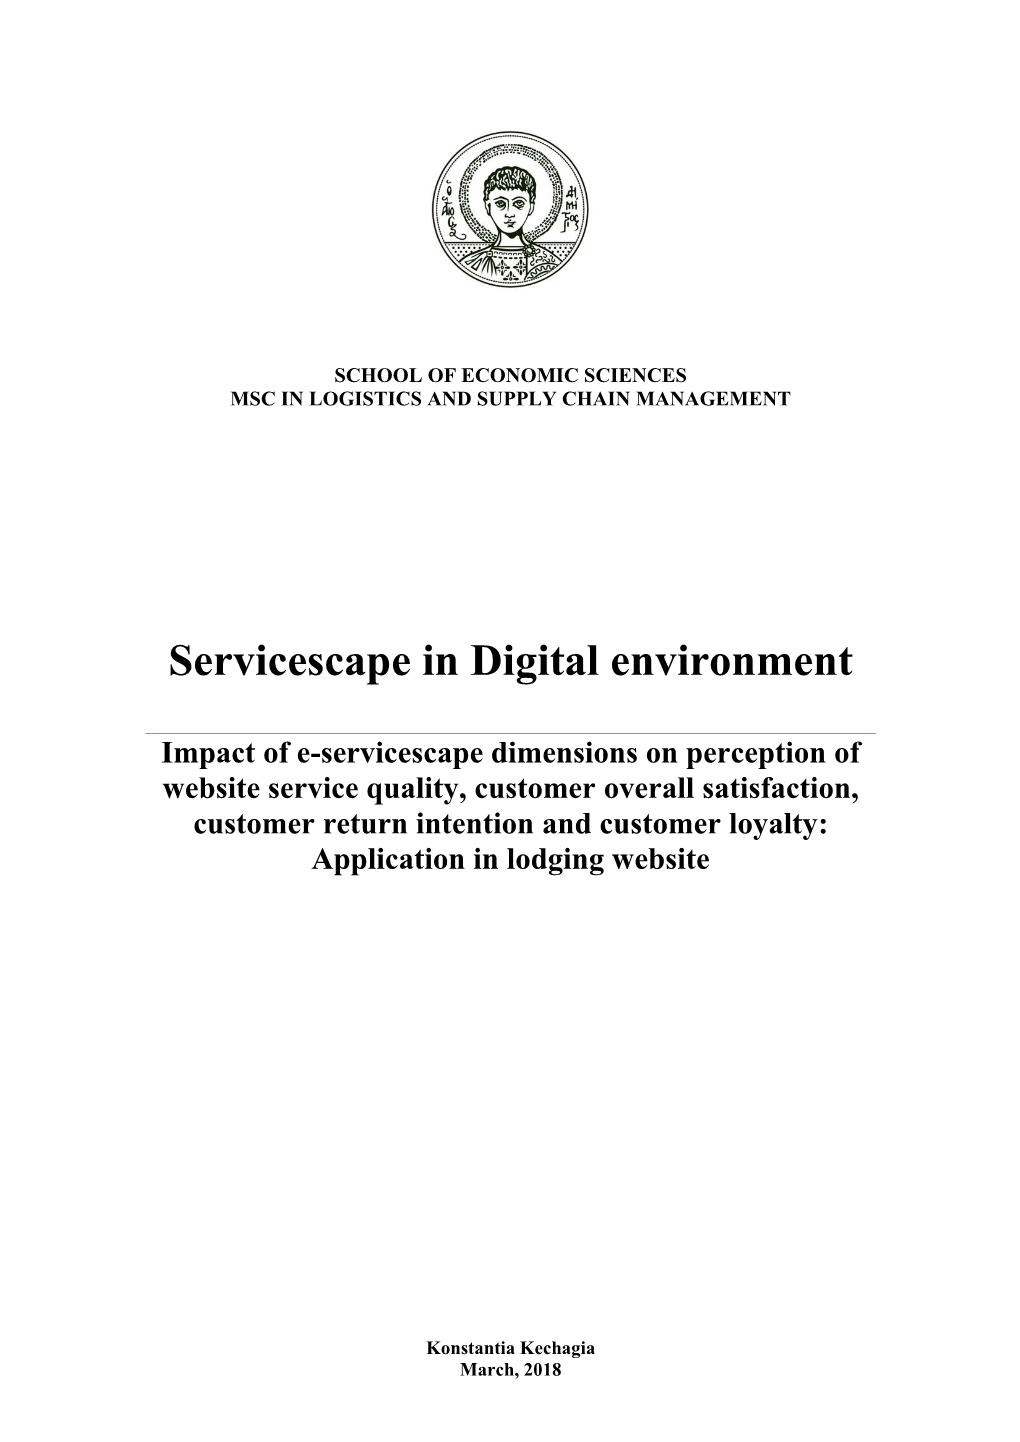 Servicescape in Digital Environment